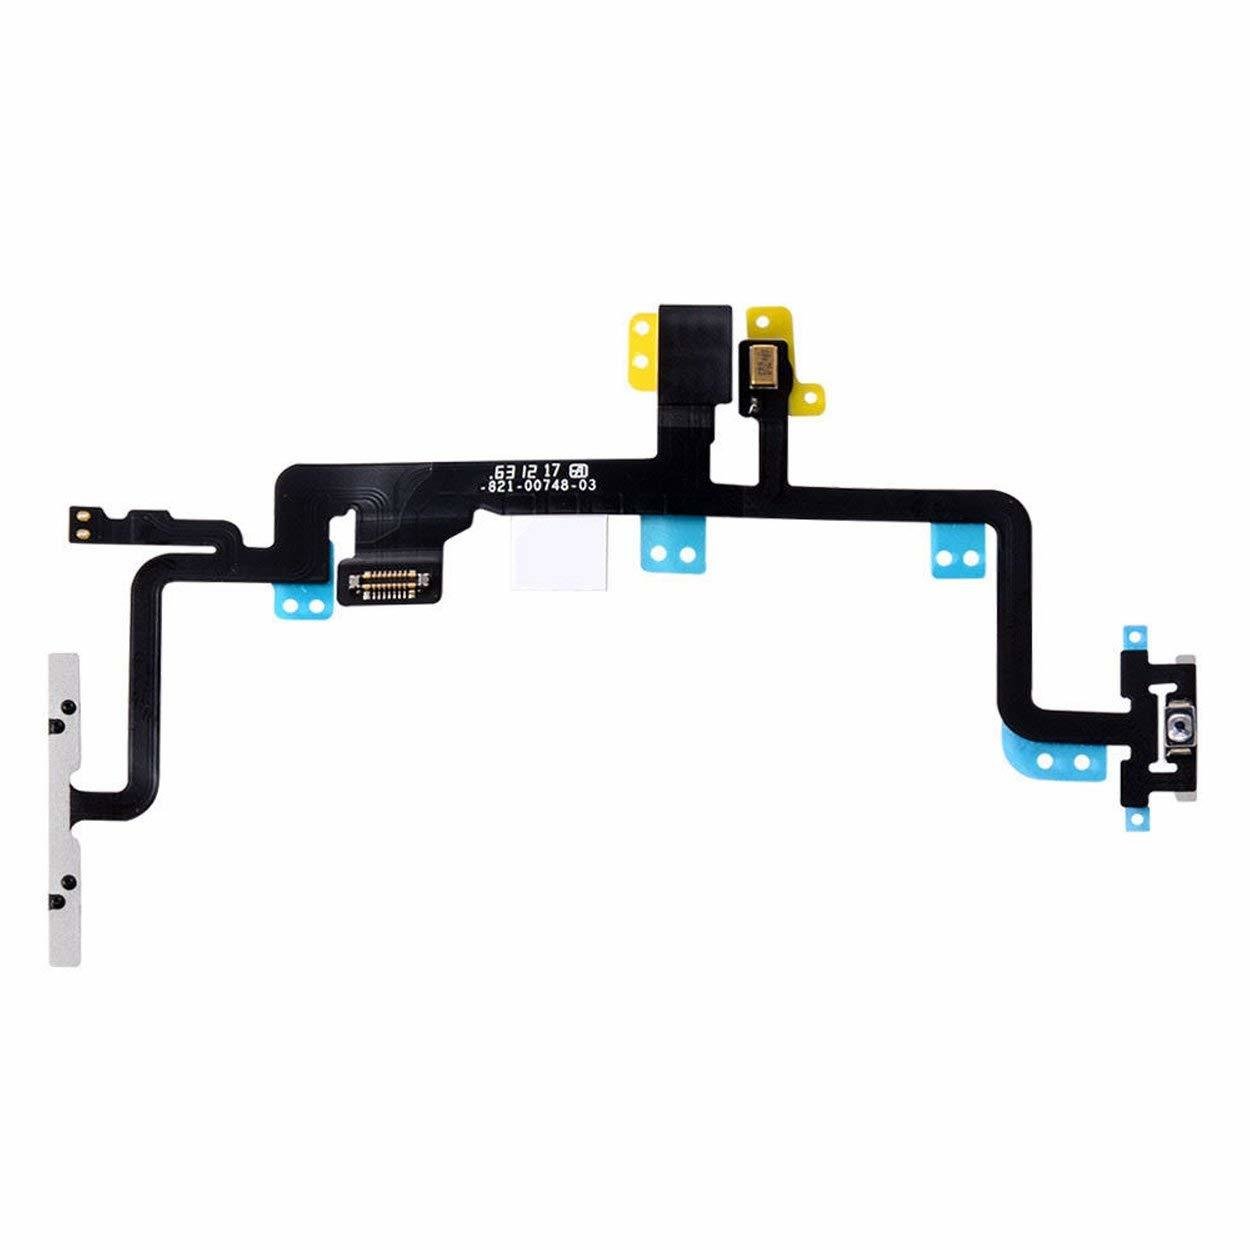 iPhone 7 Plus Power on/off Flex Cable with Volume Control Buttons